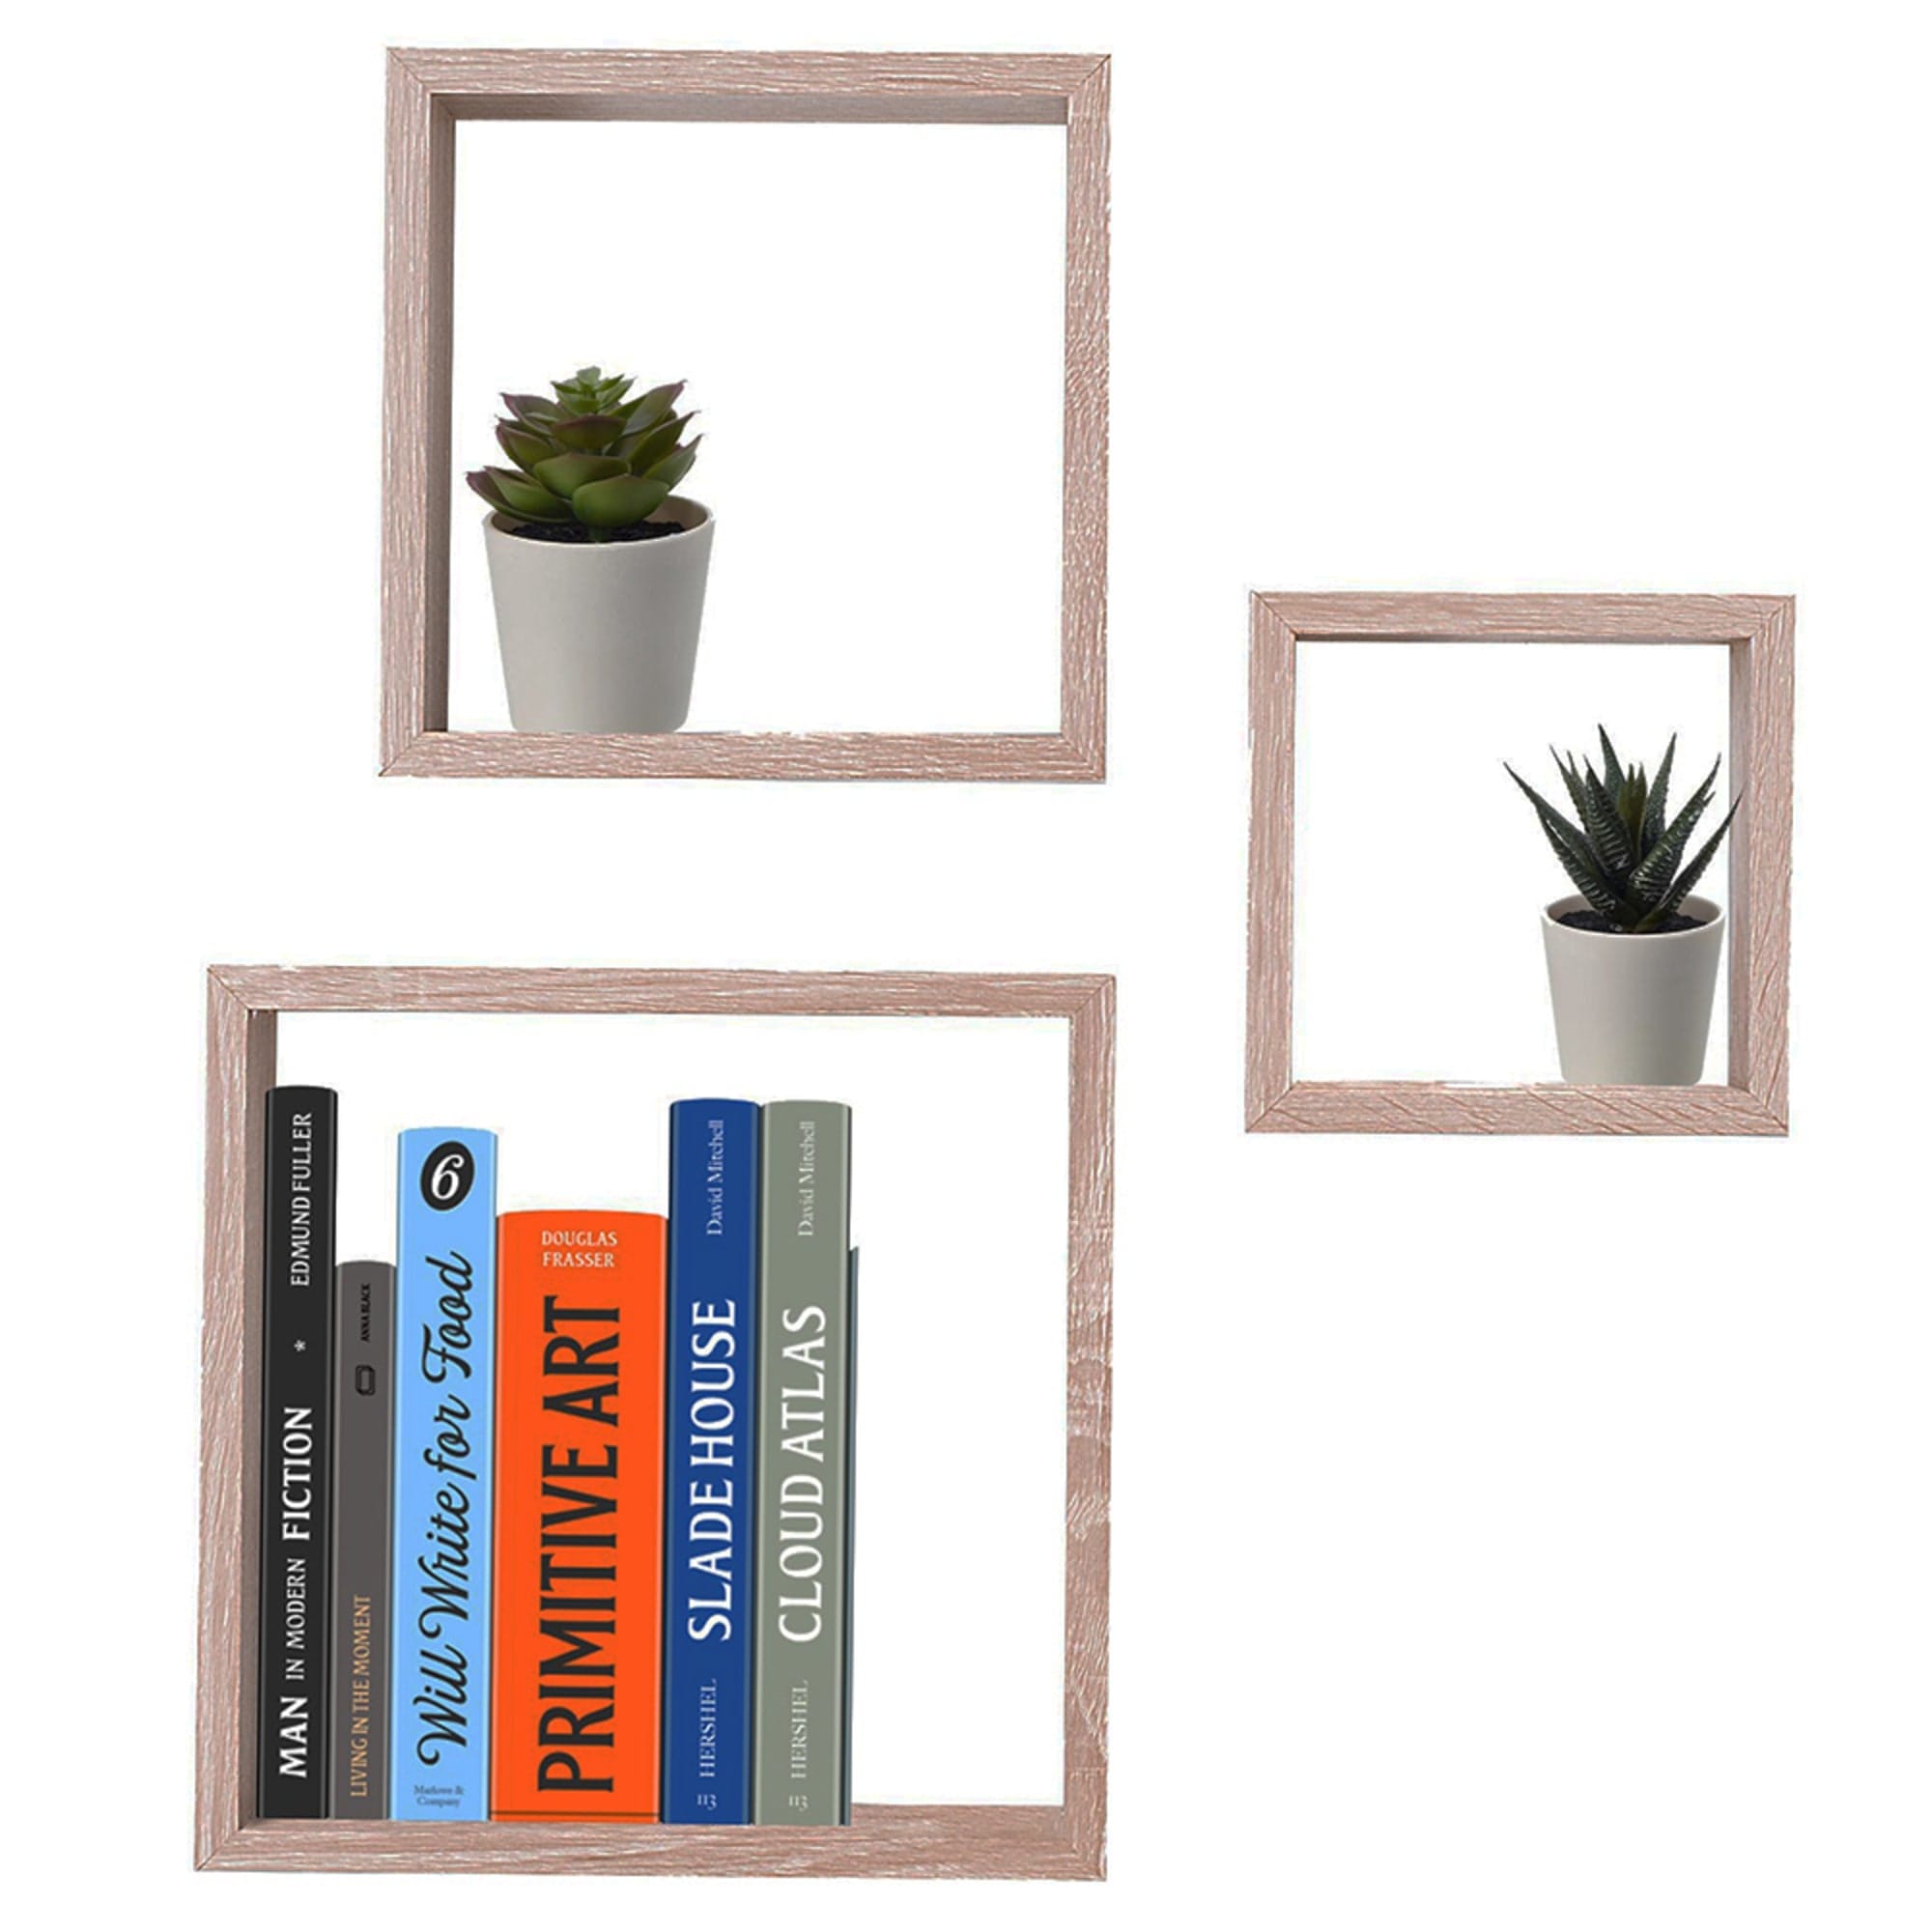 Home Basics 3-Piece MDF Floating Wall Cubes, Oak $12.00 EACH, CASE PACK OF 6